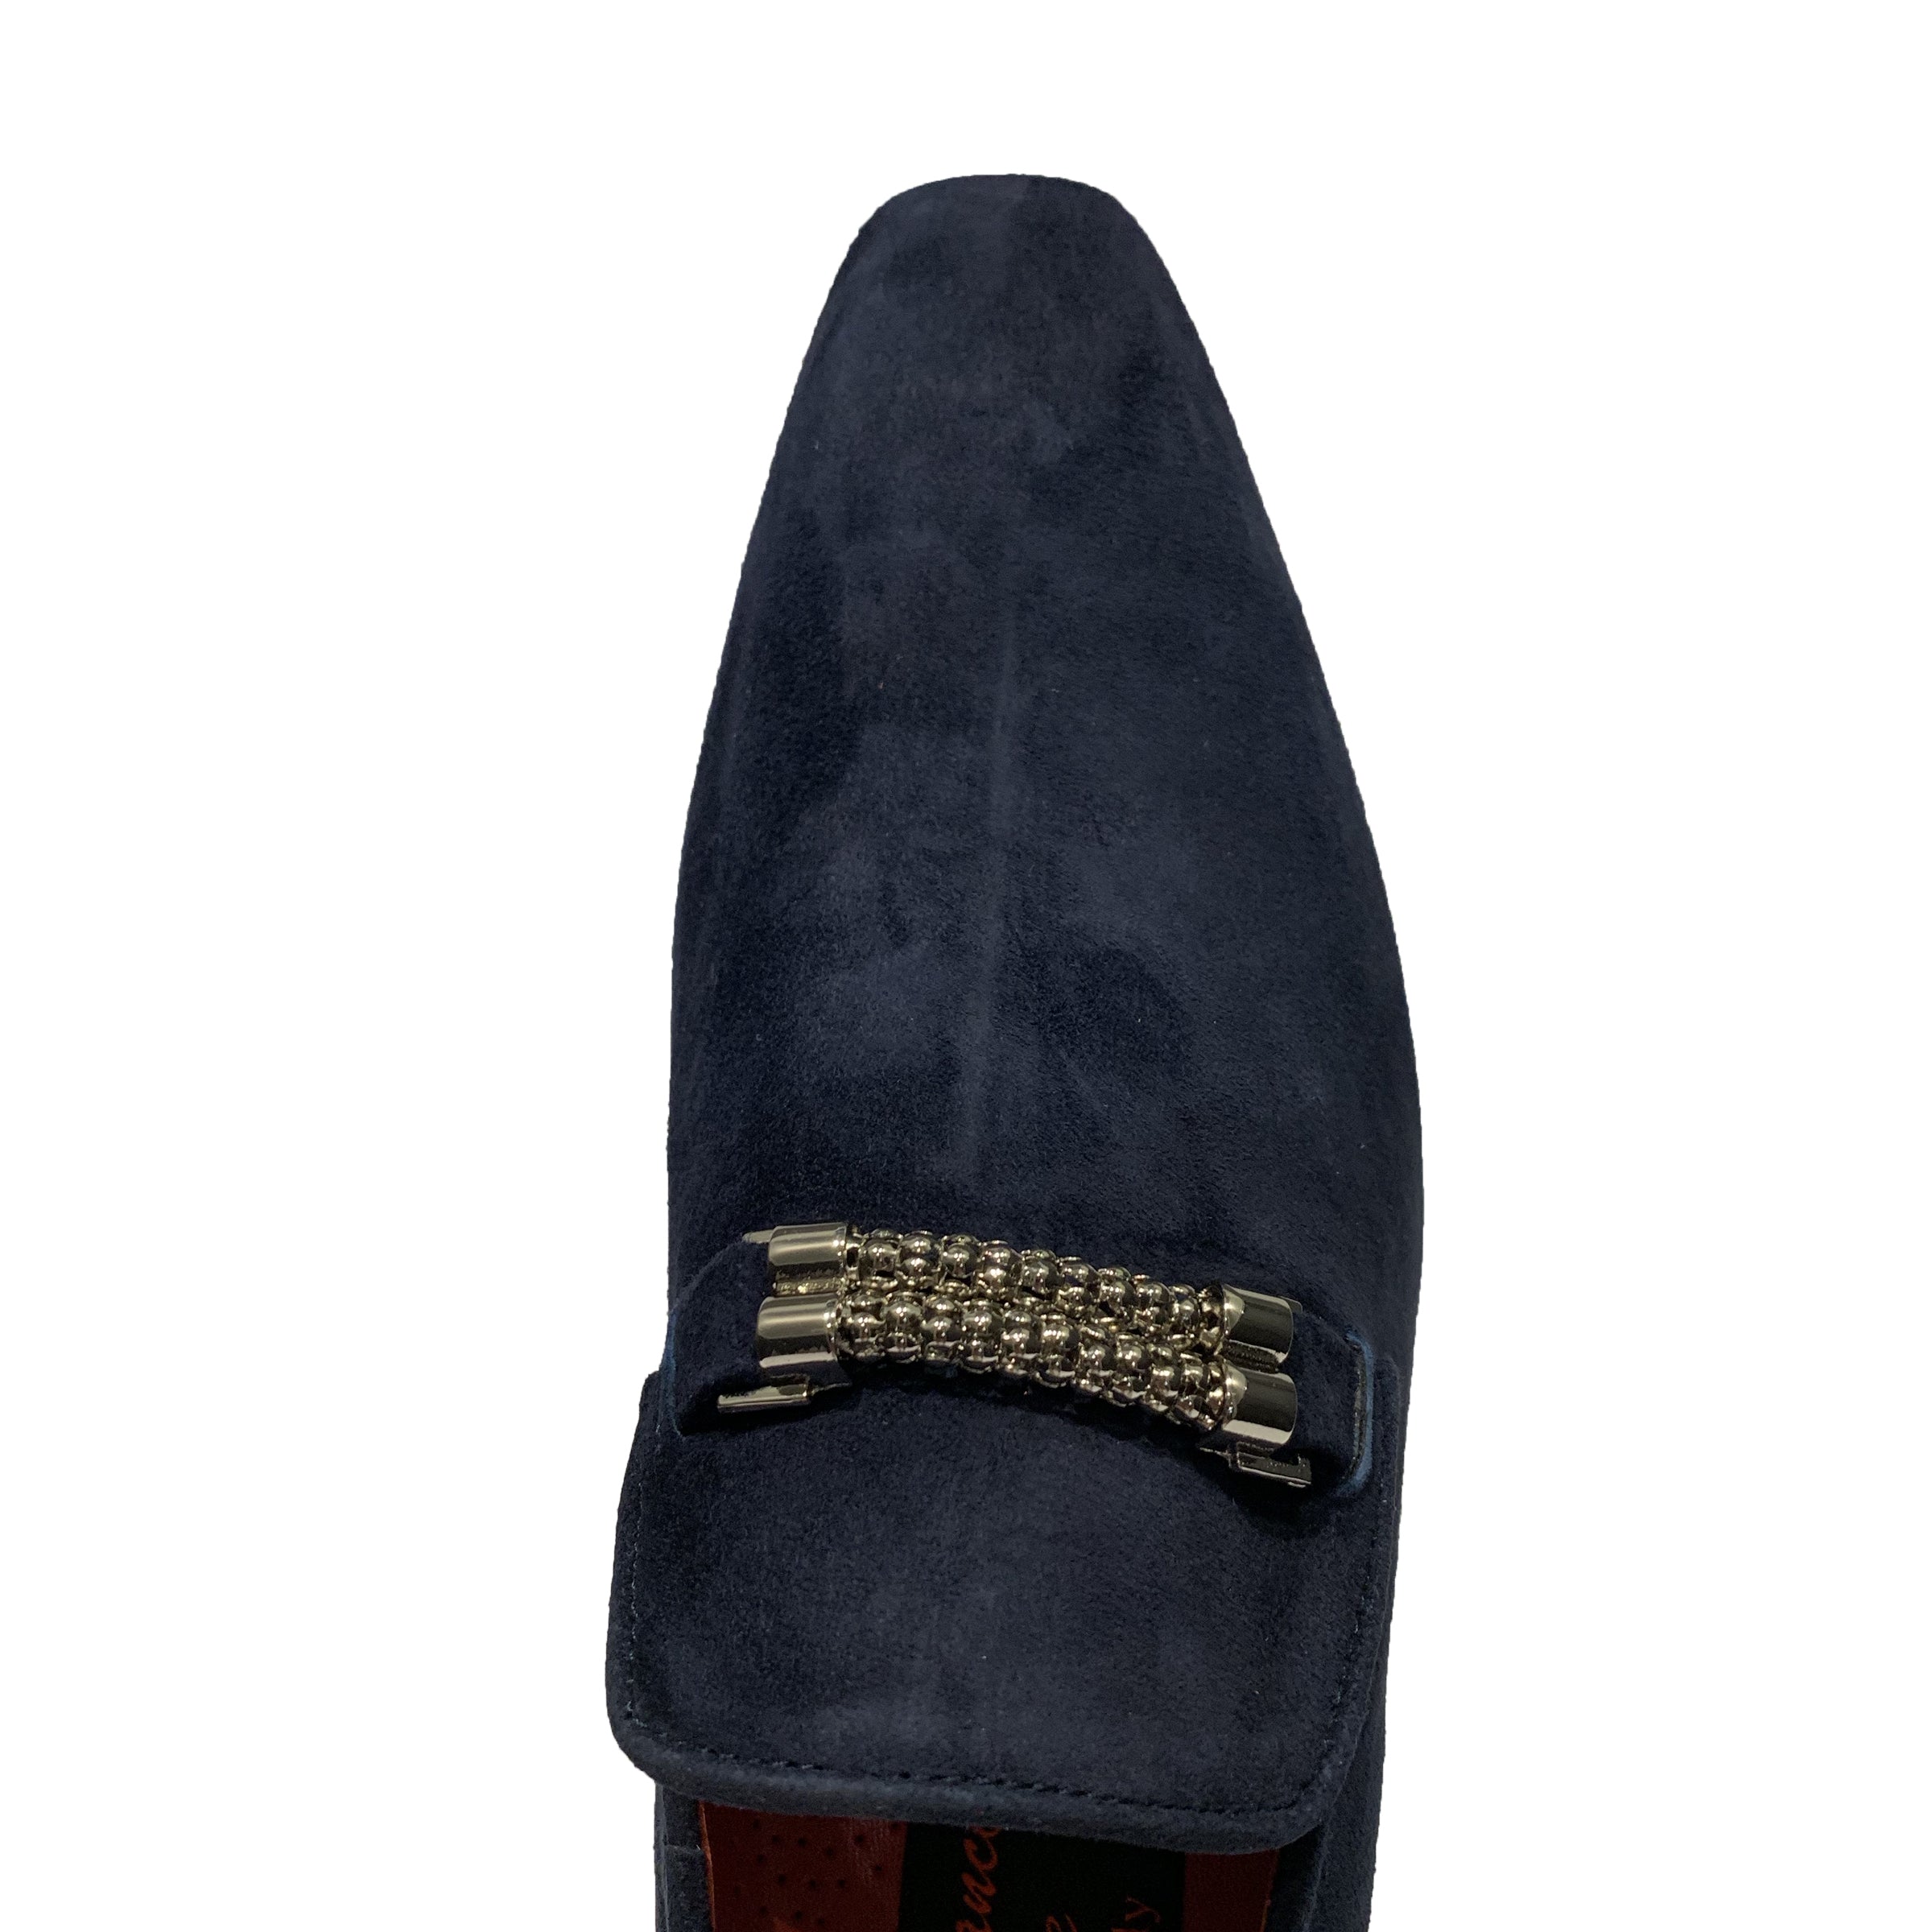 blue suede slip on shoes